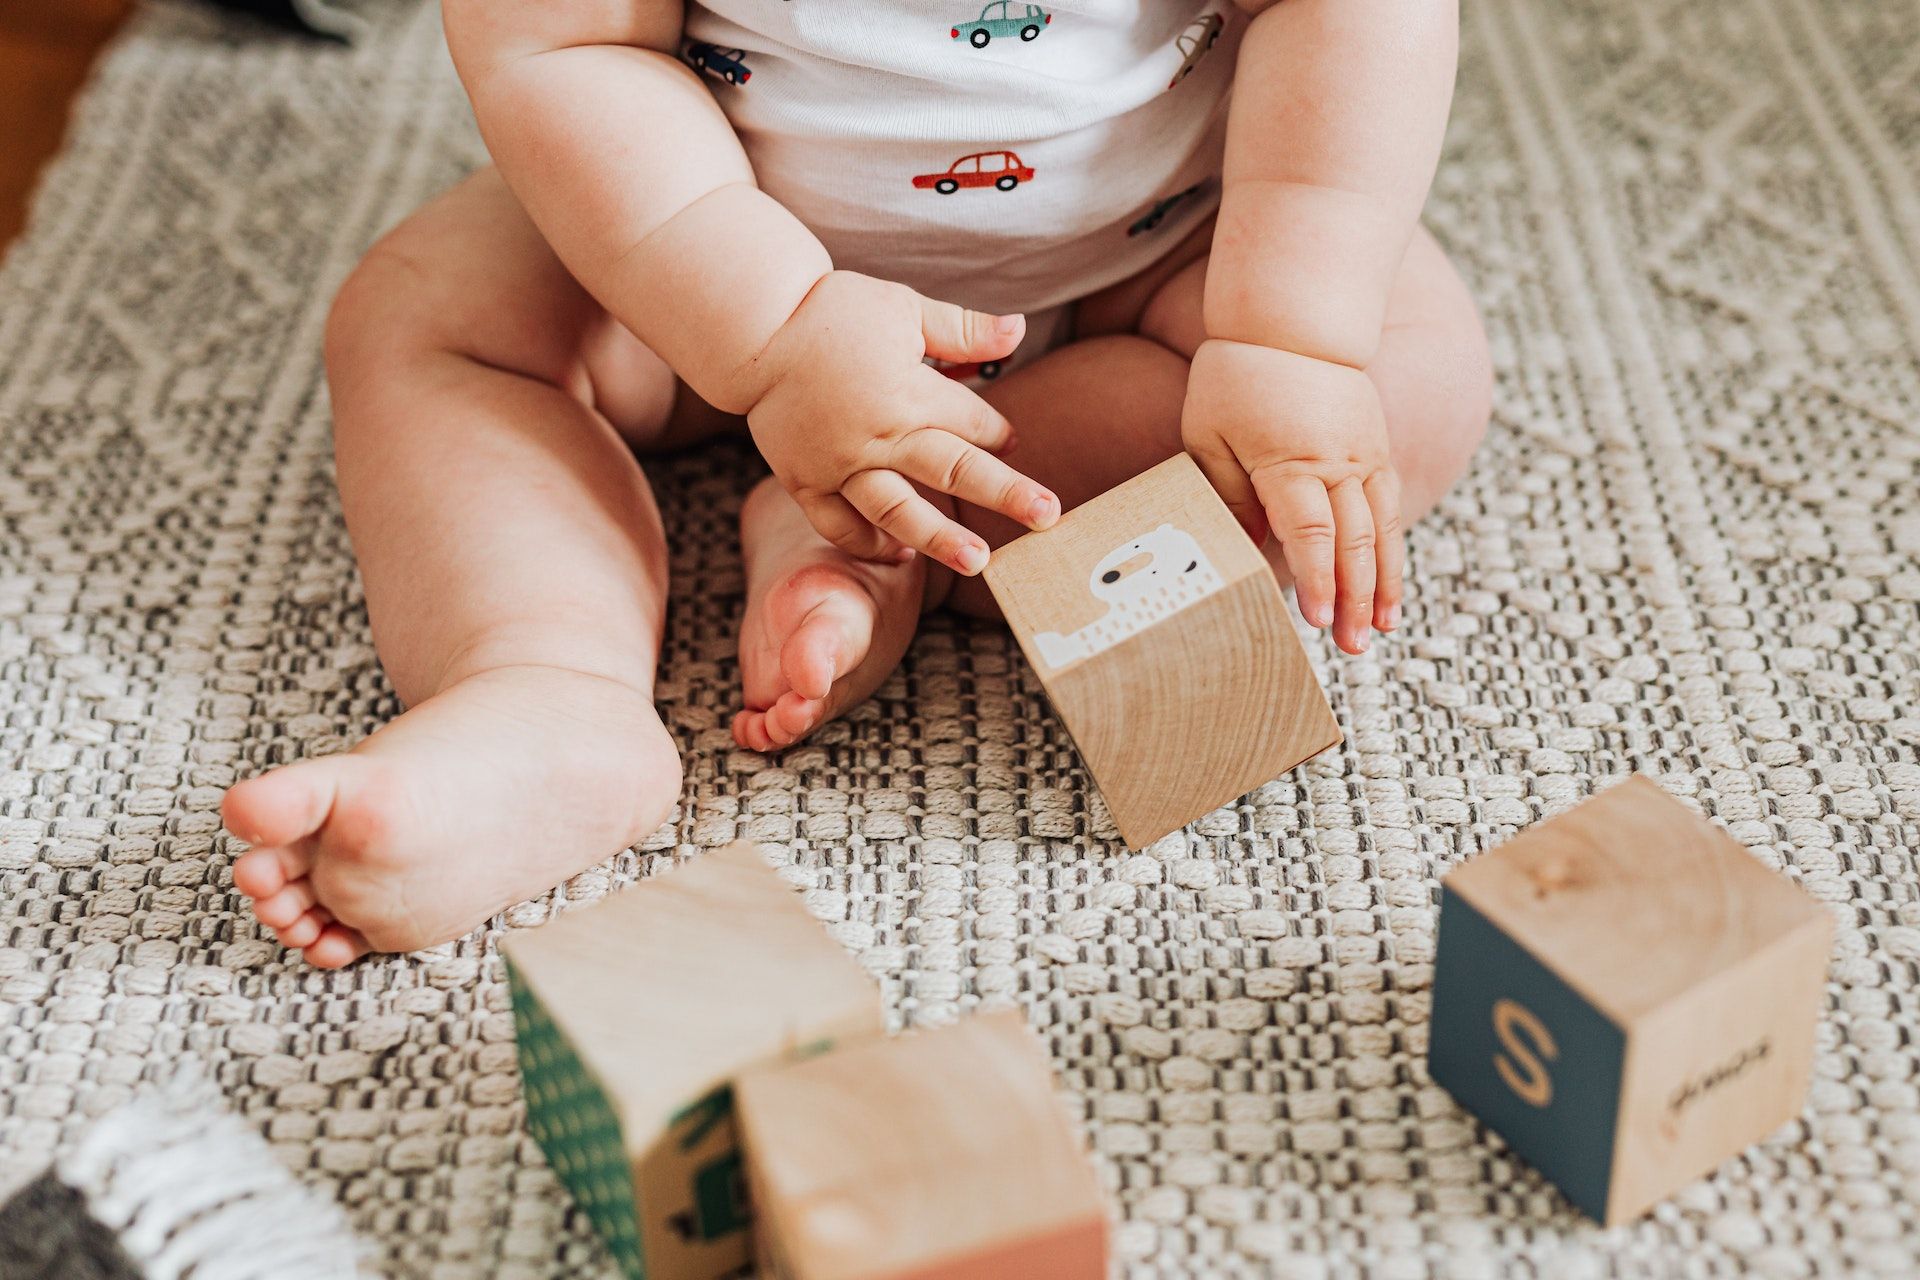 Baby plays with block toys.